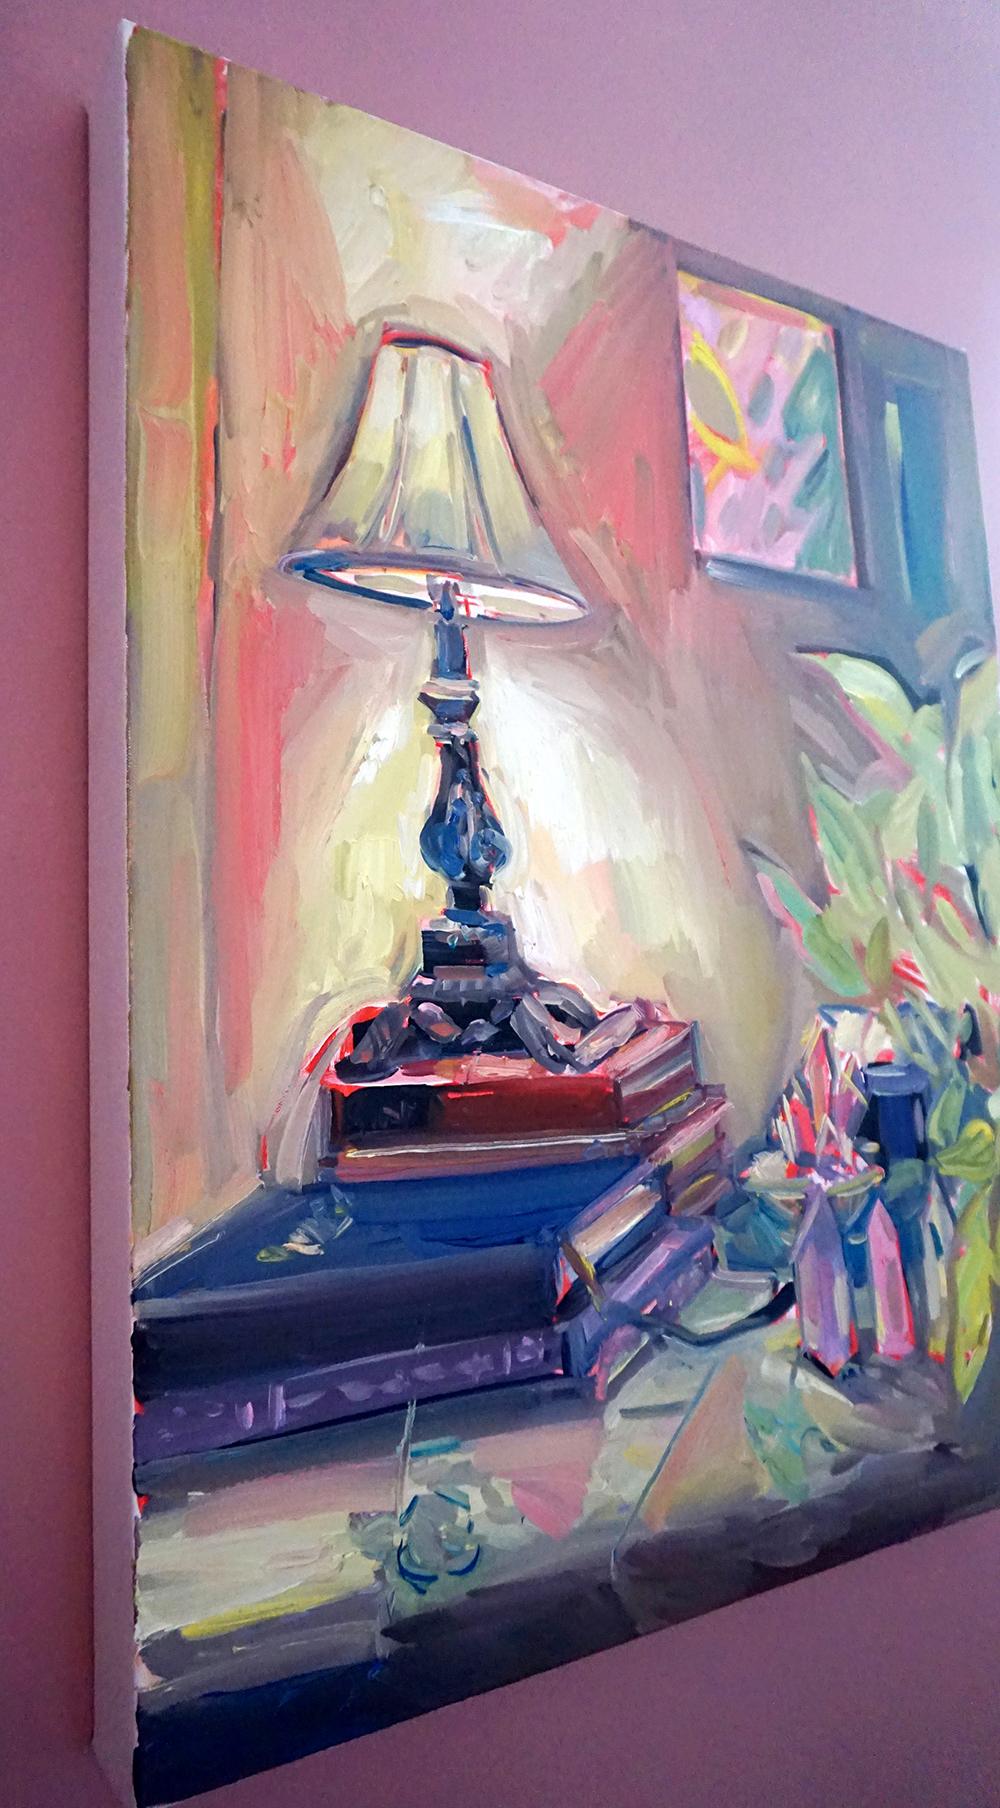 Alter, Oil on canvas, bright and textured interior series w books and crystals - Painting by Ekaterina Popova